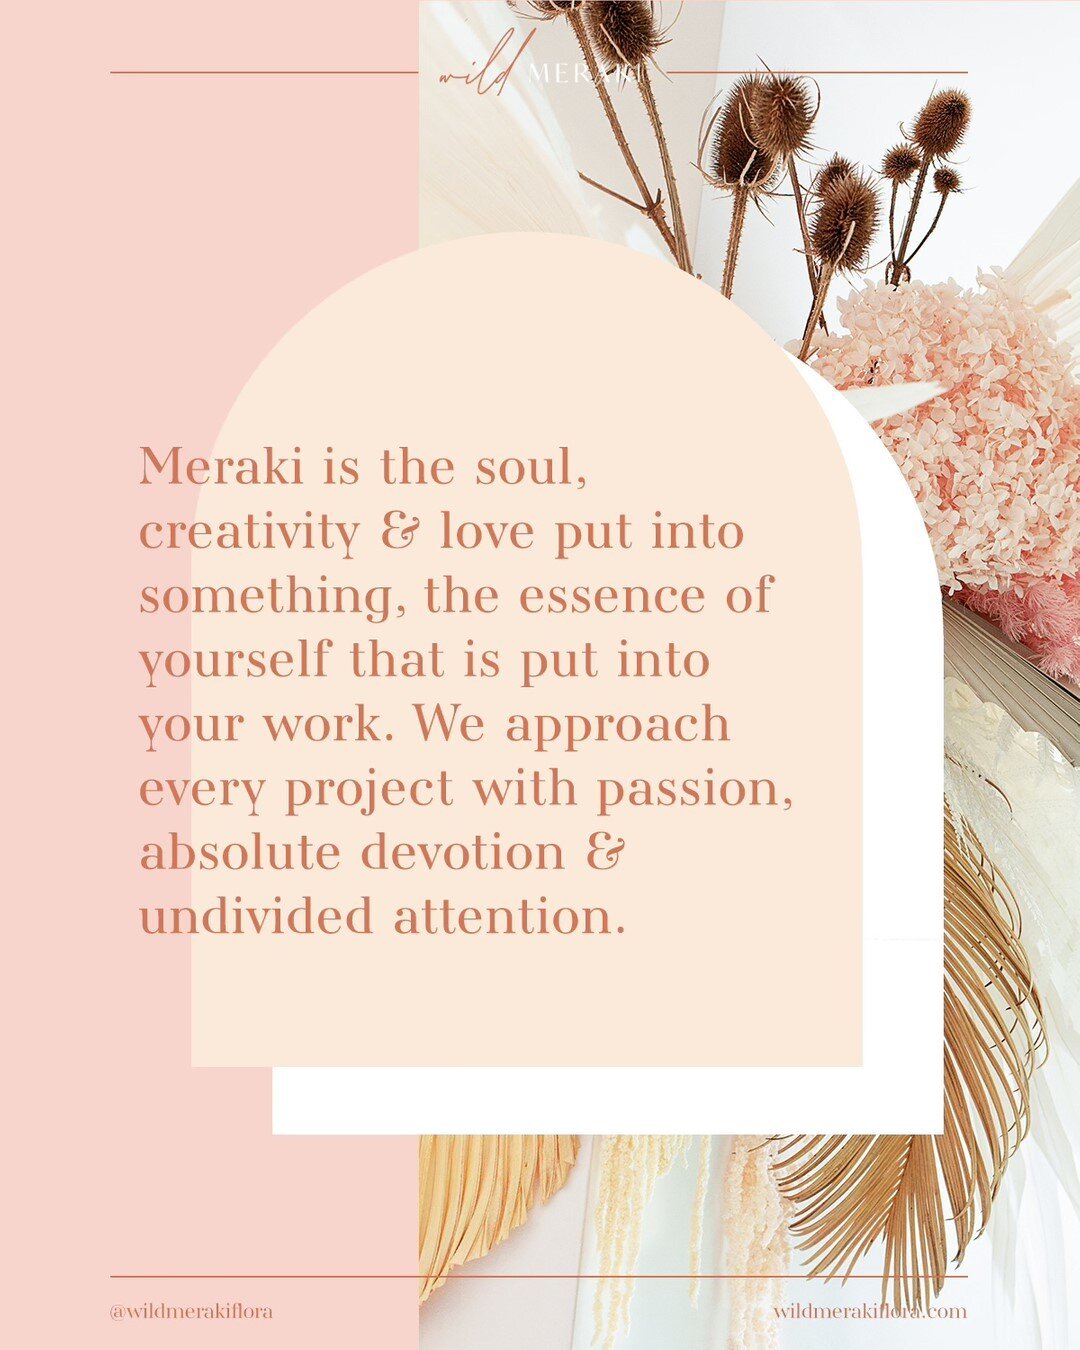 The moment I saw the meaning of the word &lsquo;Meraki&rsquo; I immediately resonated with it. Finally there was a word that described the heart, soul and passion that goes into everything I create - and I&rsquo;m sure so many other creatives feel th